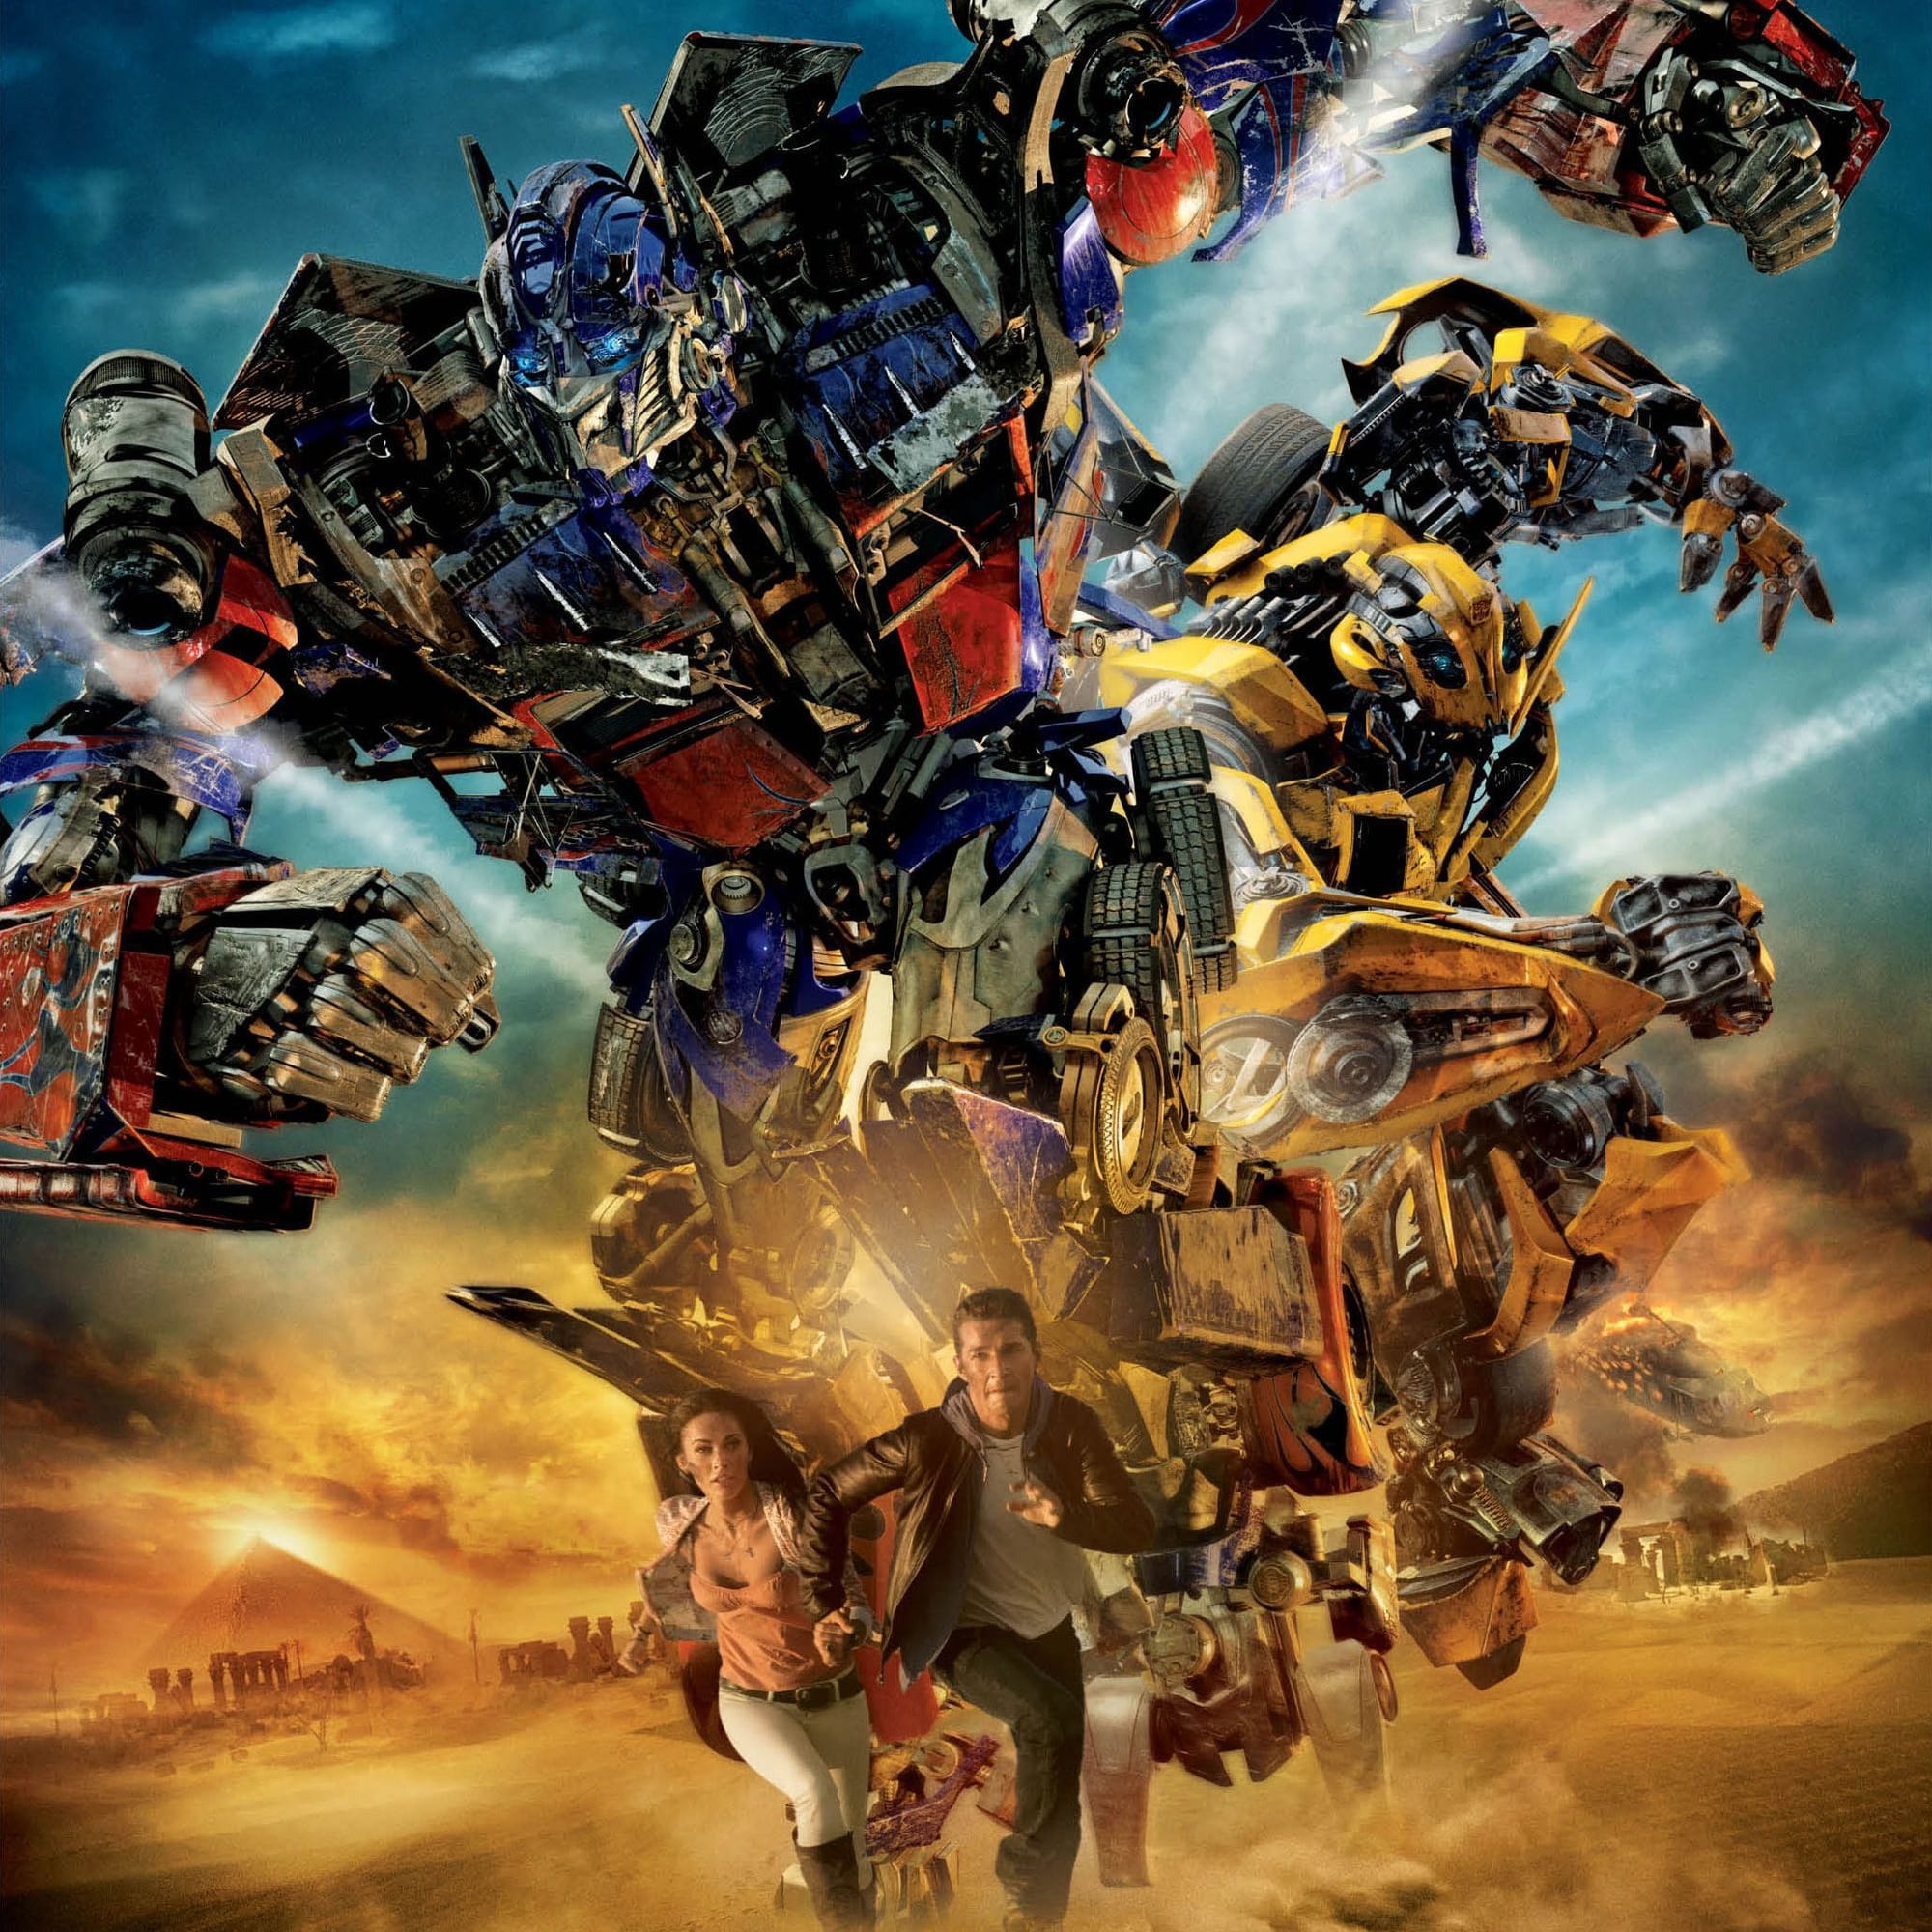 Transformers: Revenge of the Fallen for ios instal